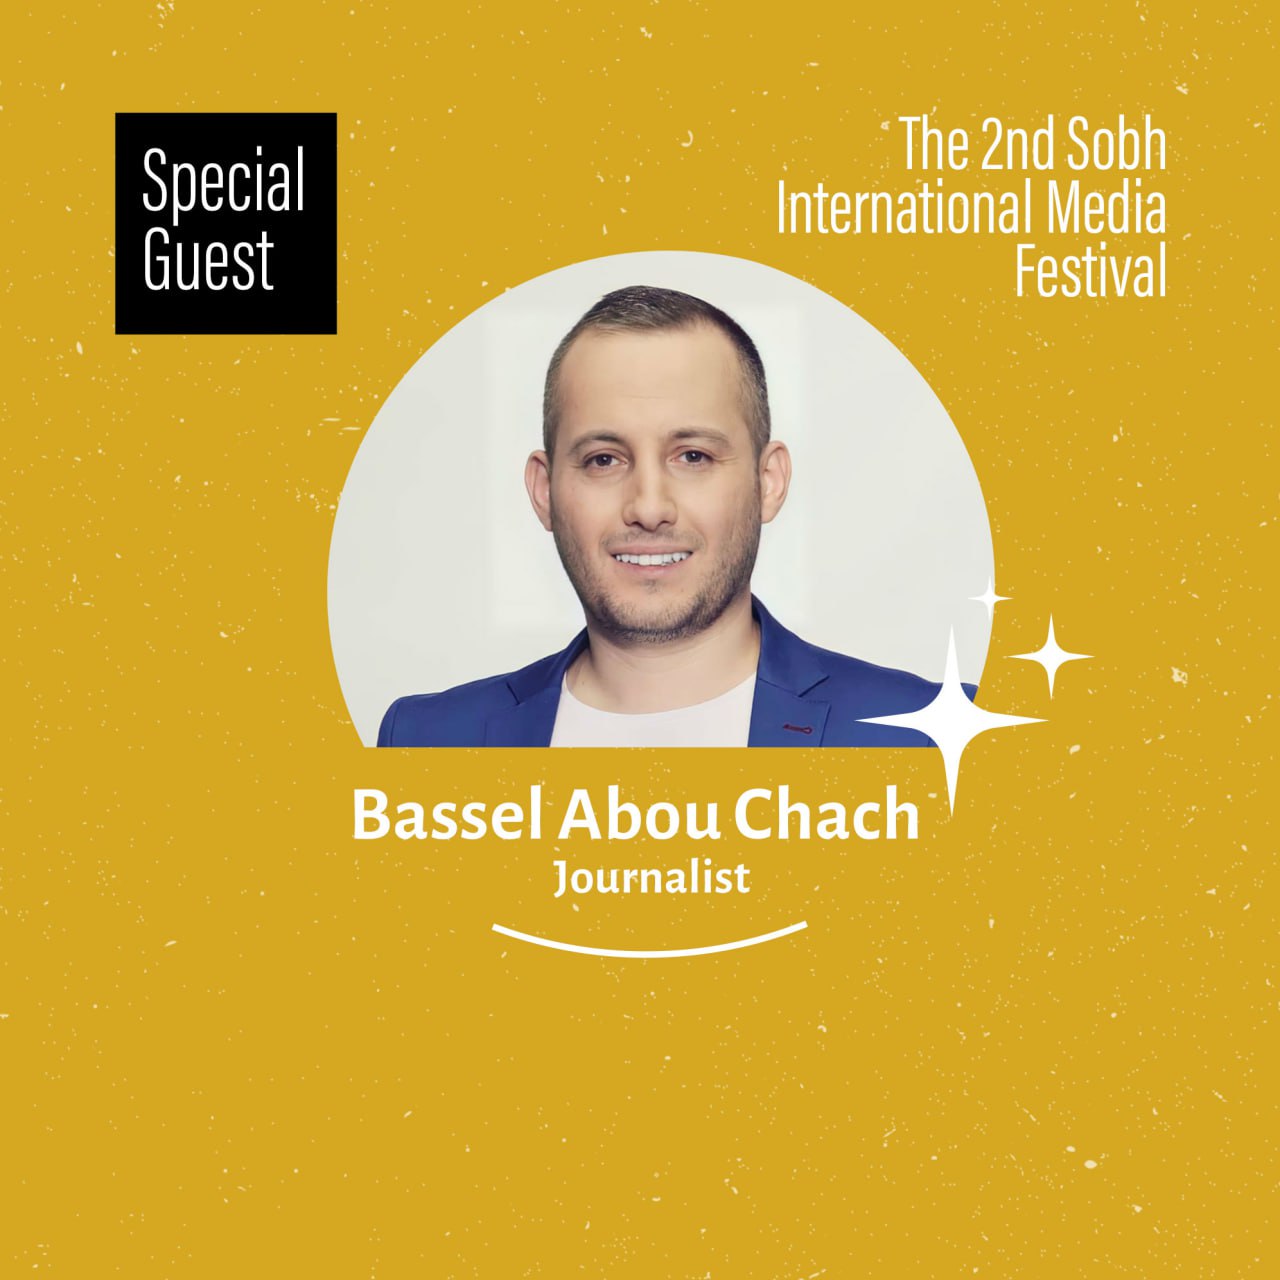 Bassel Abou Chach